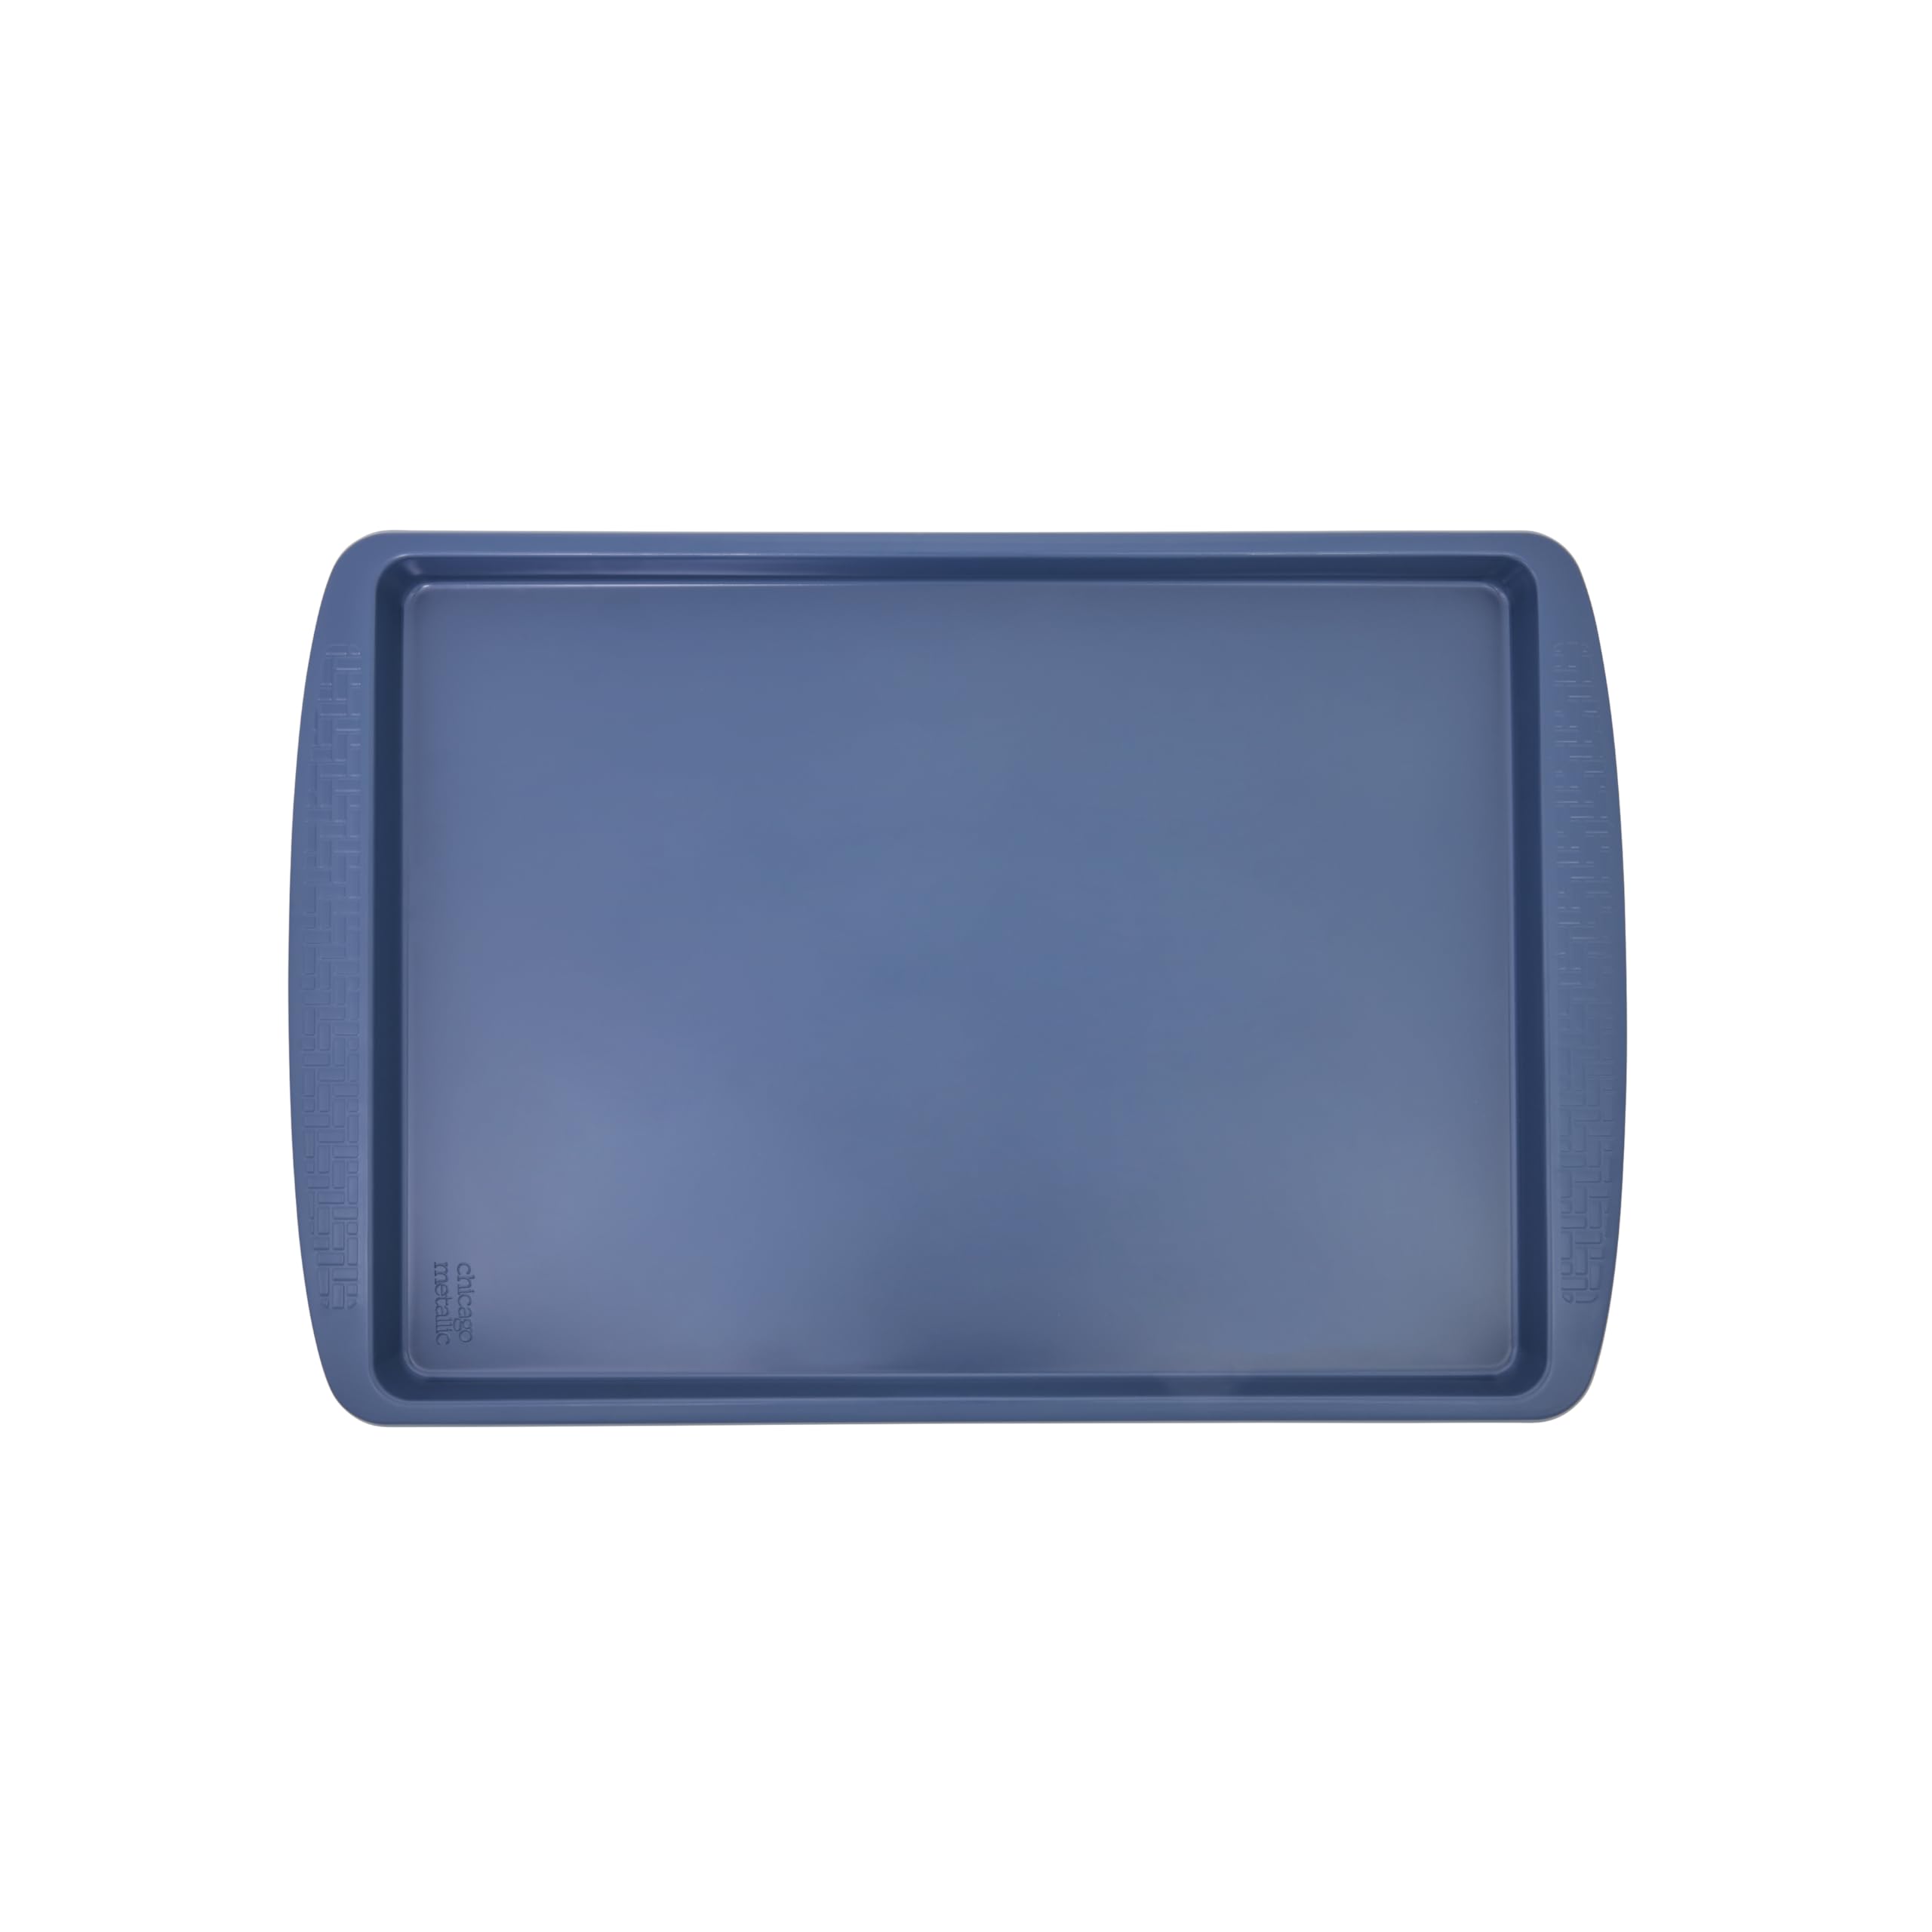 Chicago Metallic Everyday Non-stick Large Baking Sheet, Perfect for making cookies, one-pan meals, roasted vegetables, and more! 21.06 x 13.98 x 0.98 Inch, Blue